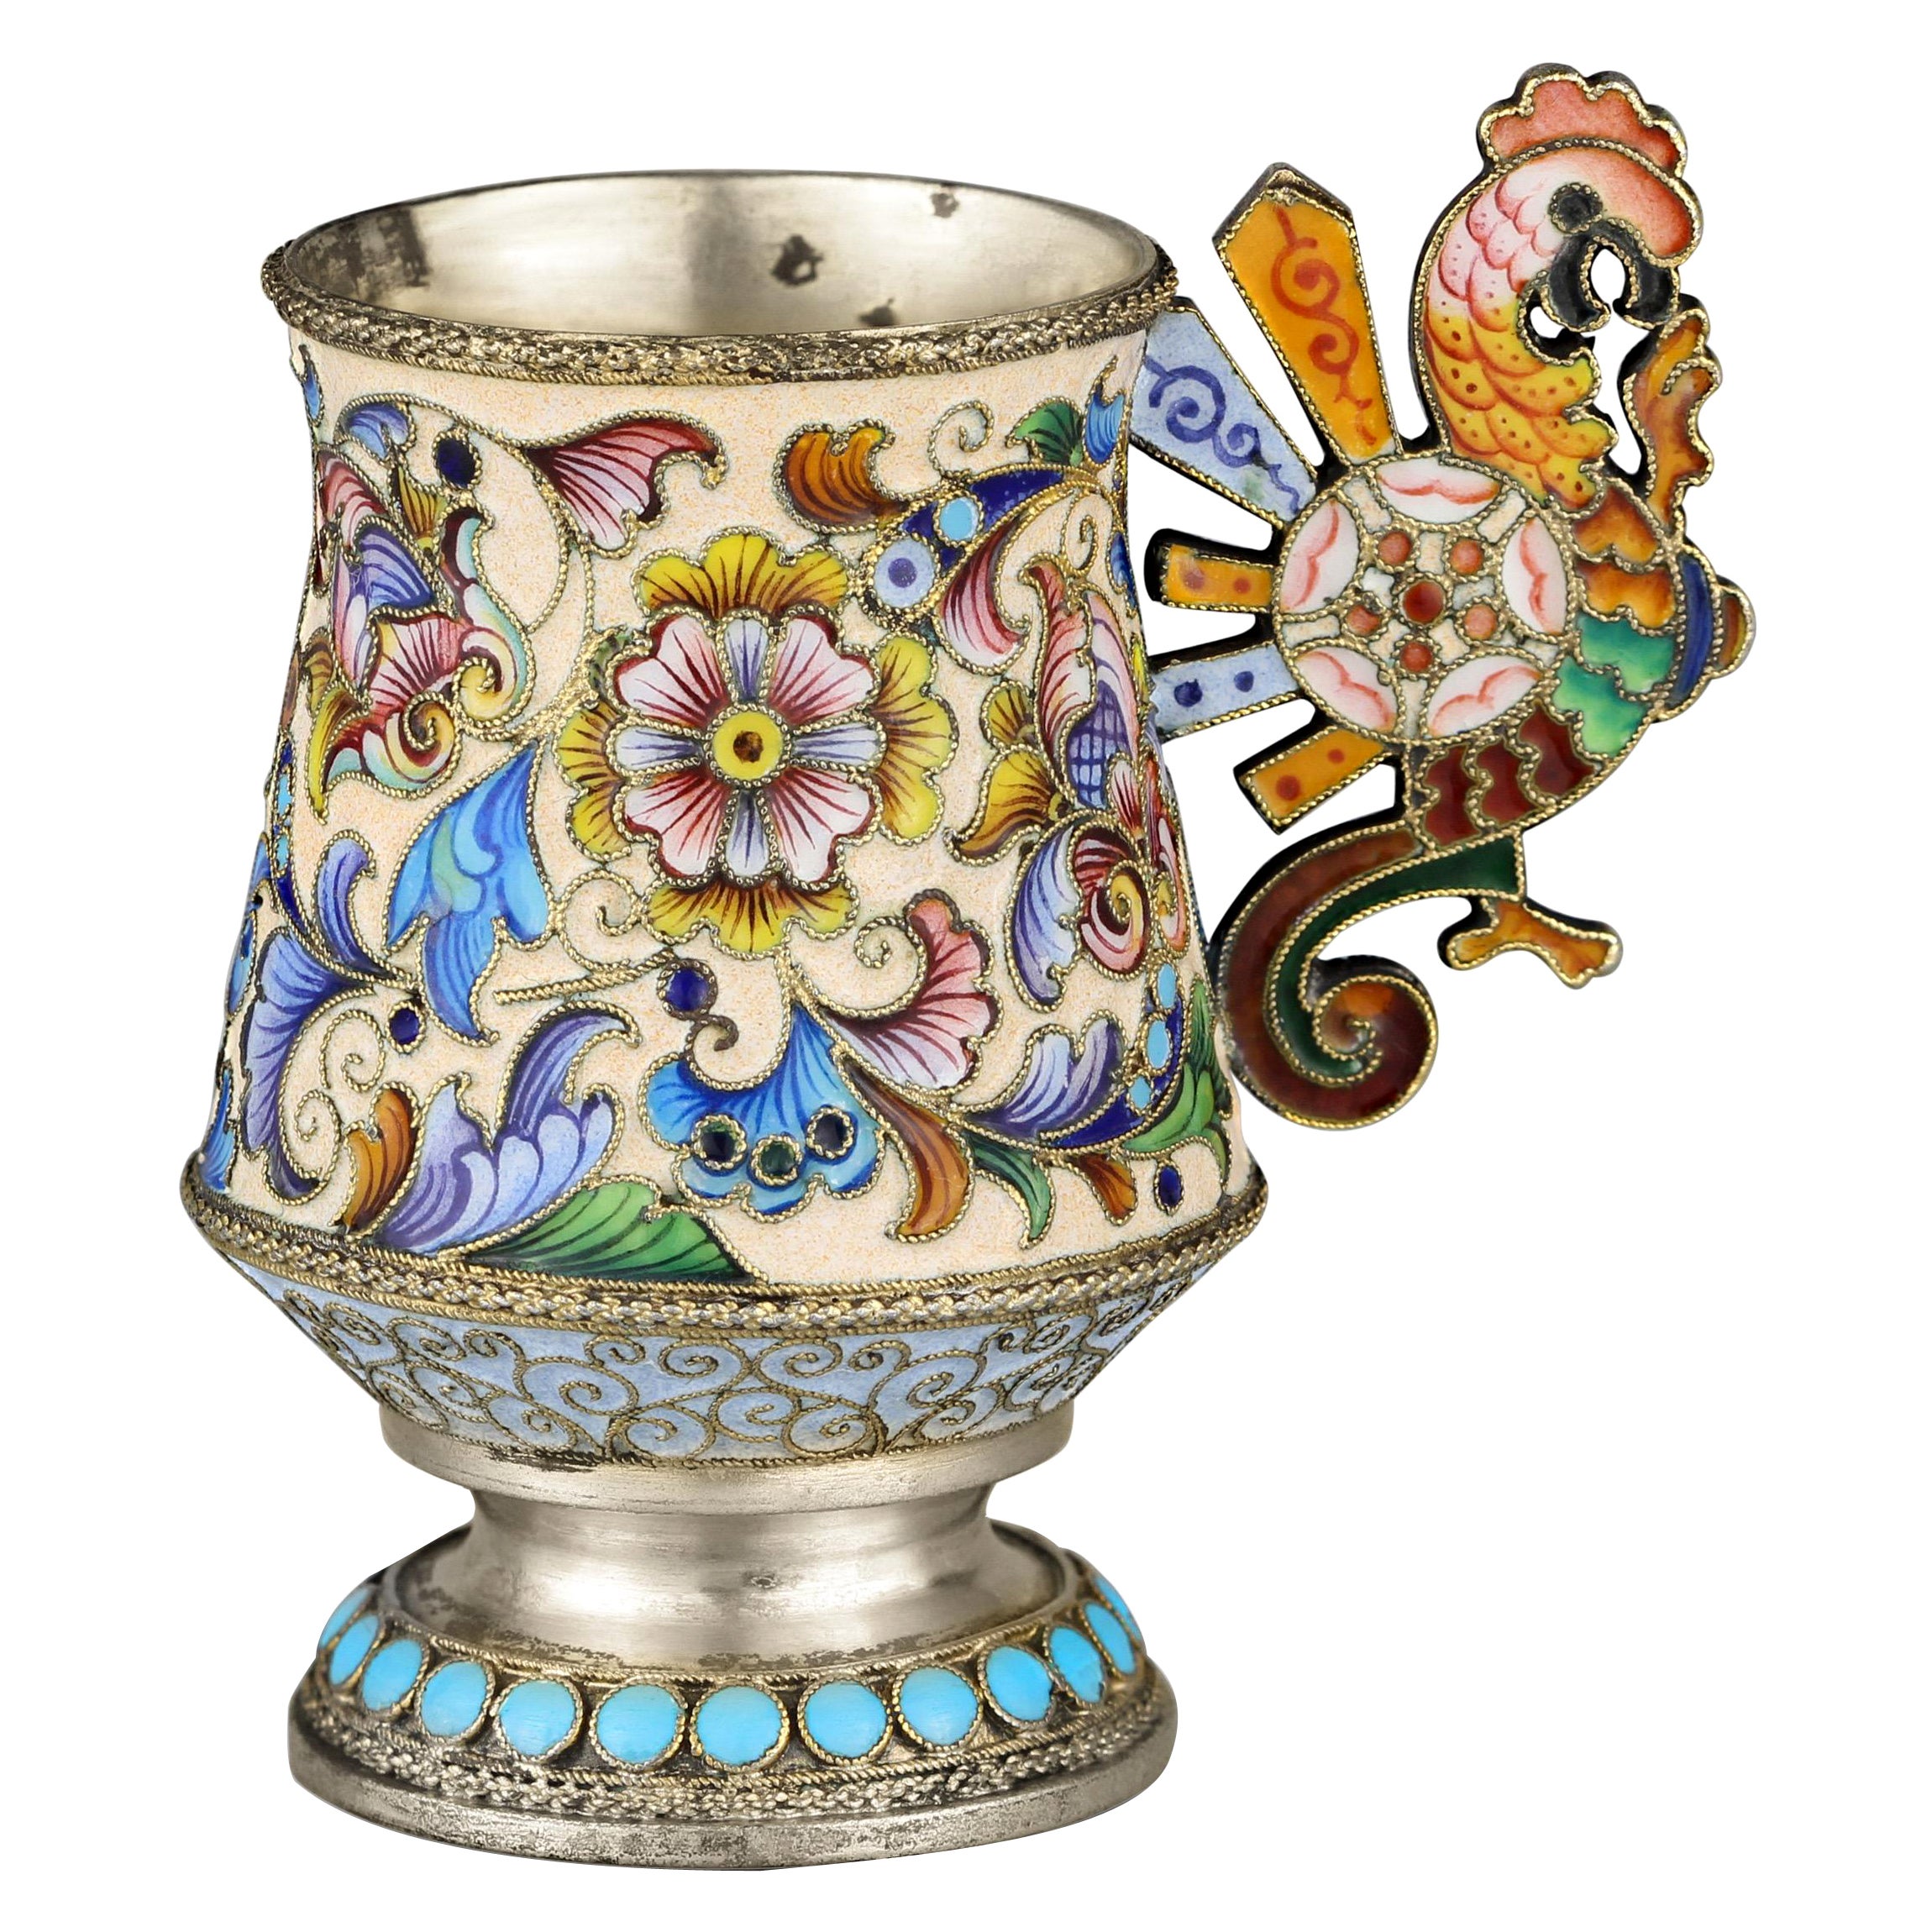 Faberge Feodor Ruckert Silver Enamel Rooster Charka Cup